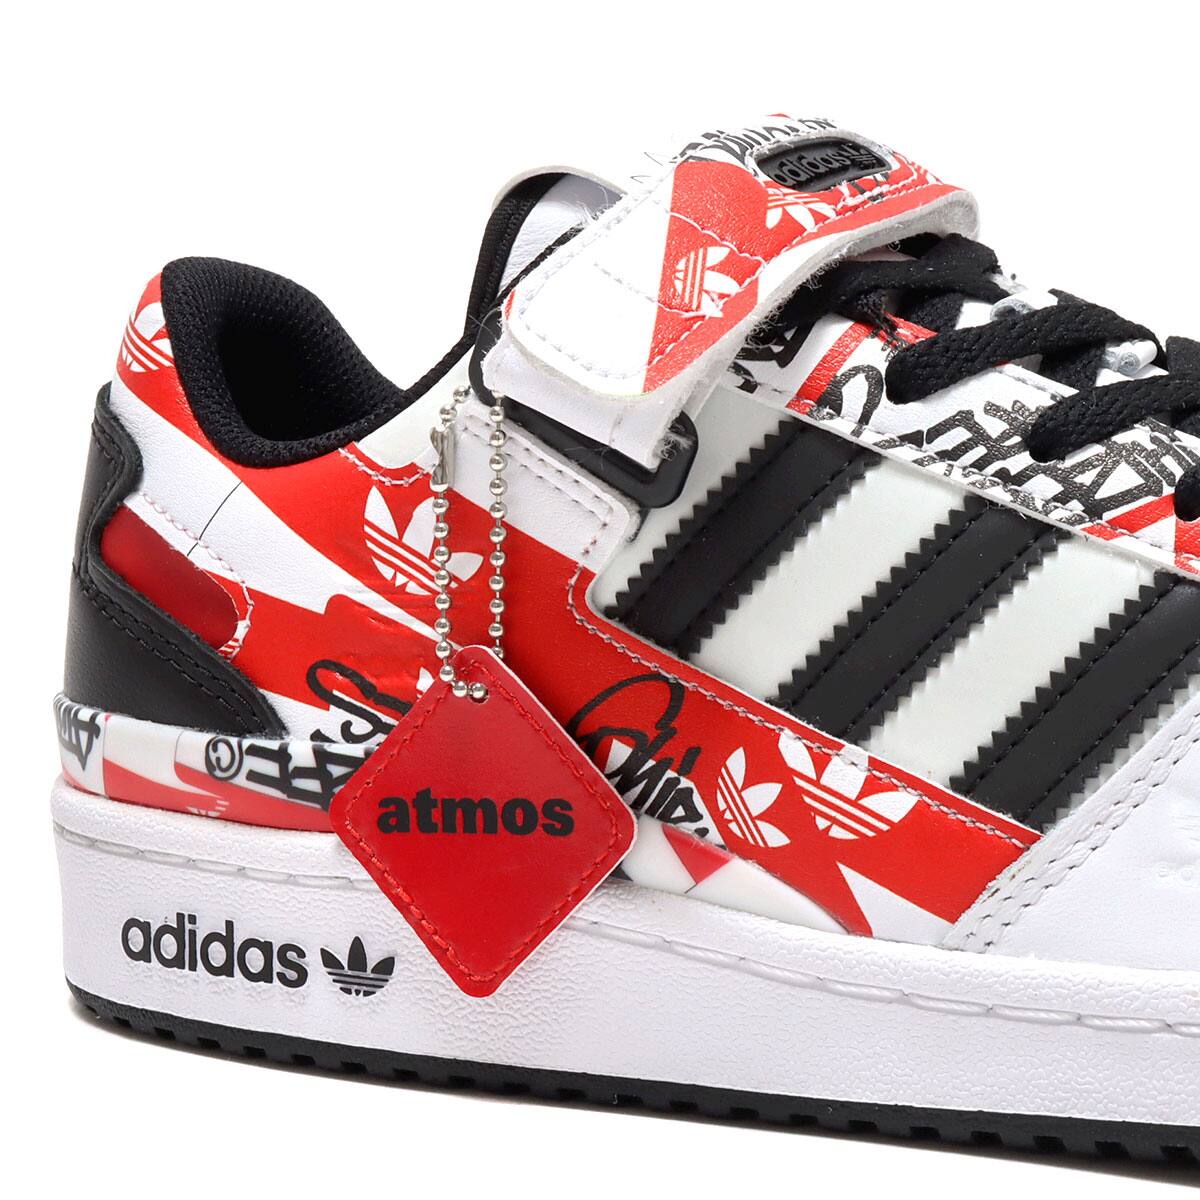 adidas FORUM LOW GRAFFITI atmos FOOTWEAR WHITE/CORE BLACK/ACTIVE RED 21FW-S